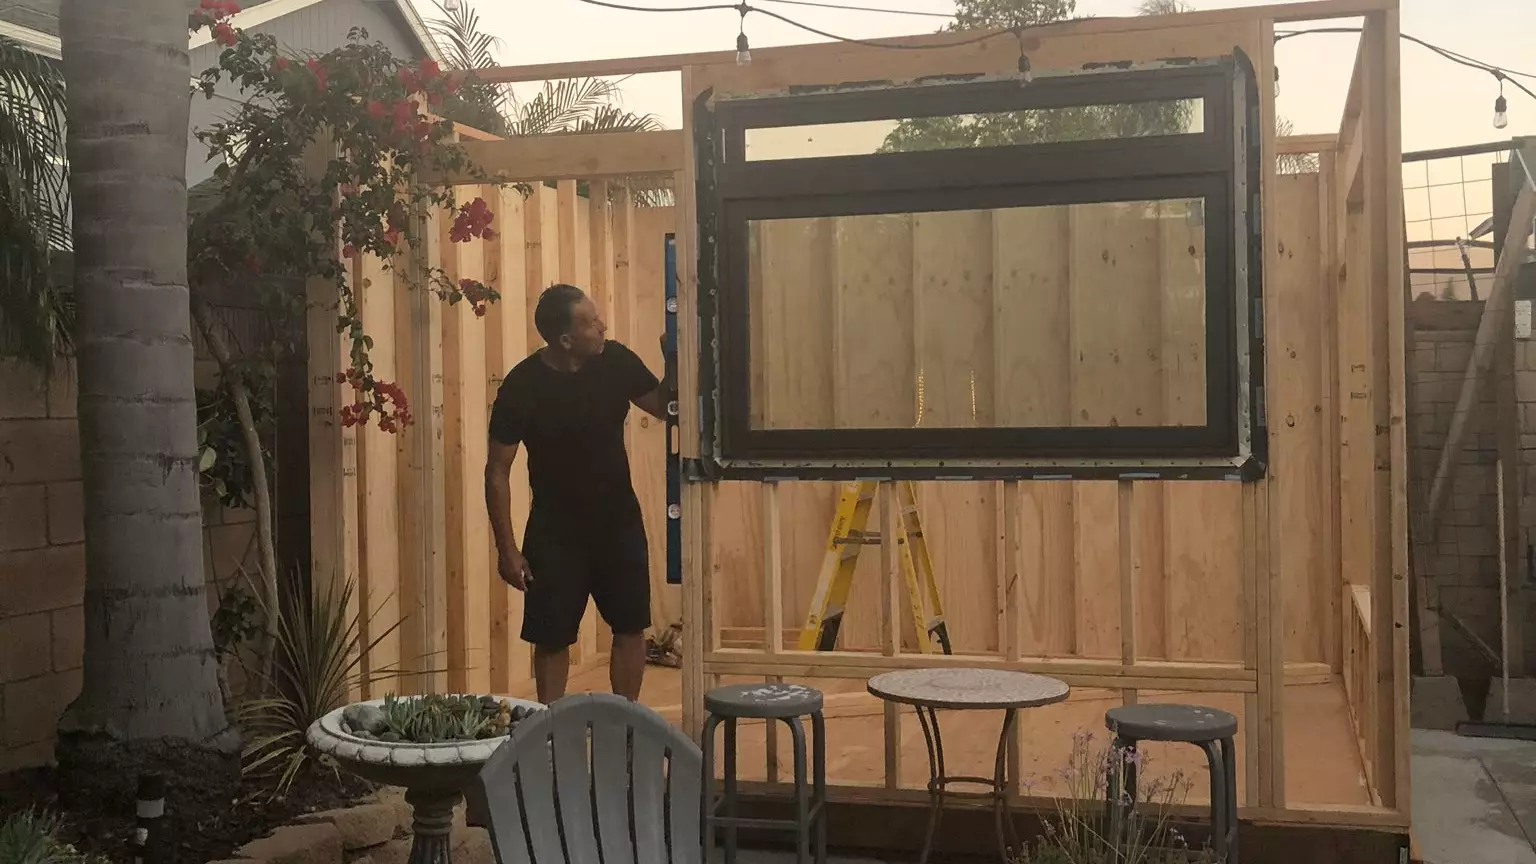 Dad Builds Backyard Coffee Shop Called 'From The Ground Up'